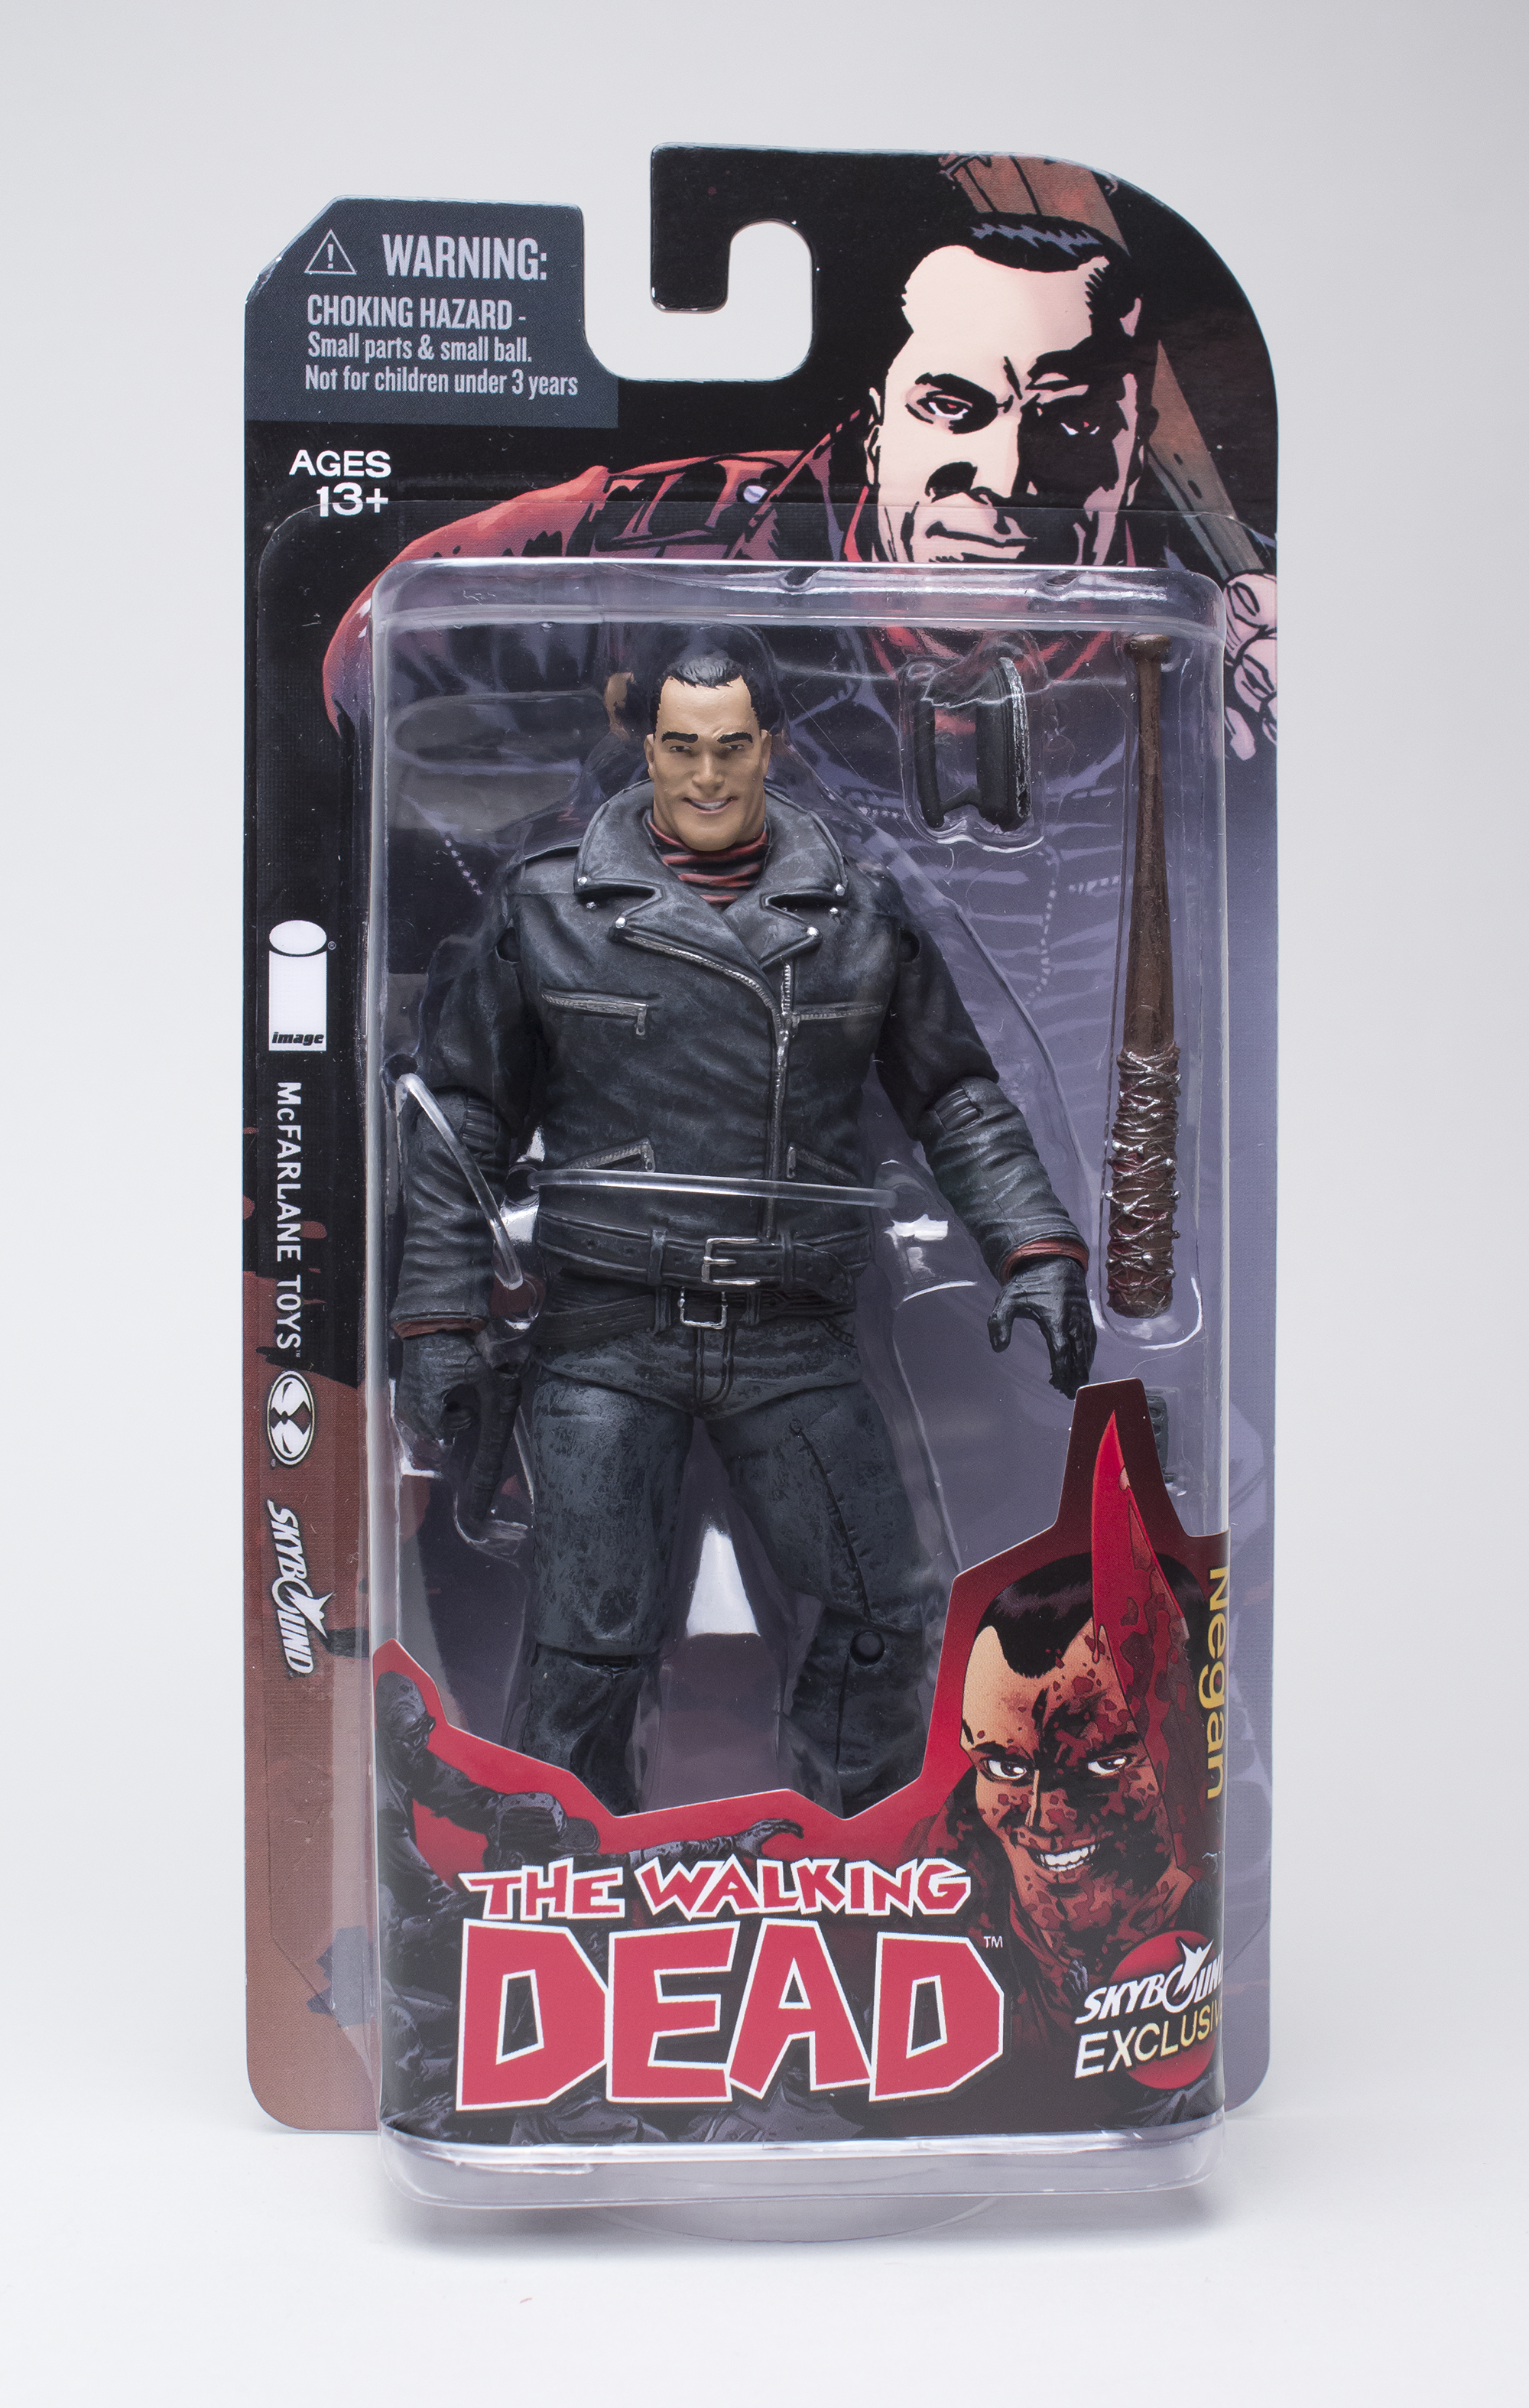 Exclusive Negan Action Figure Is Out The